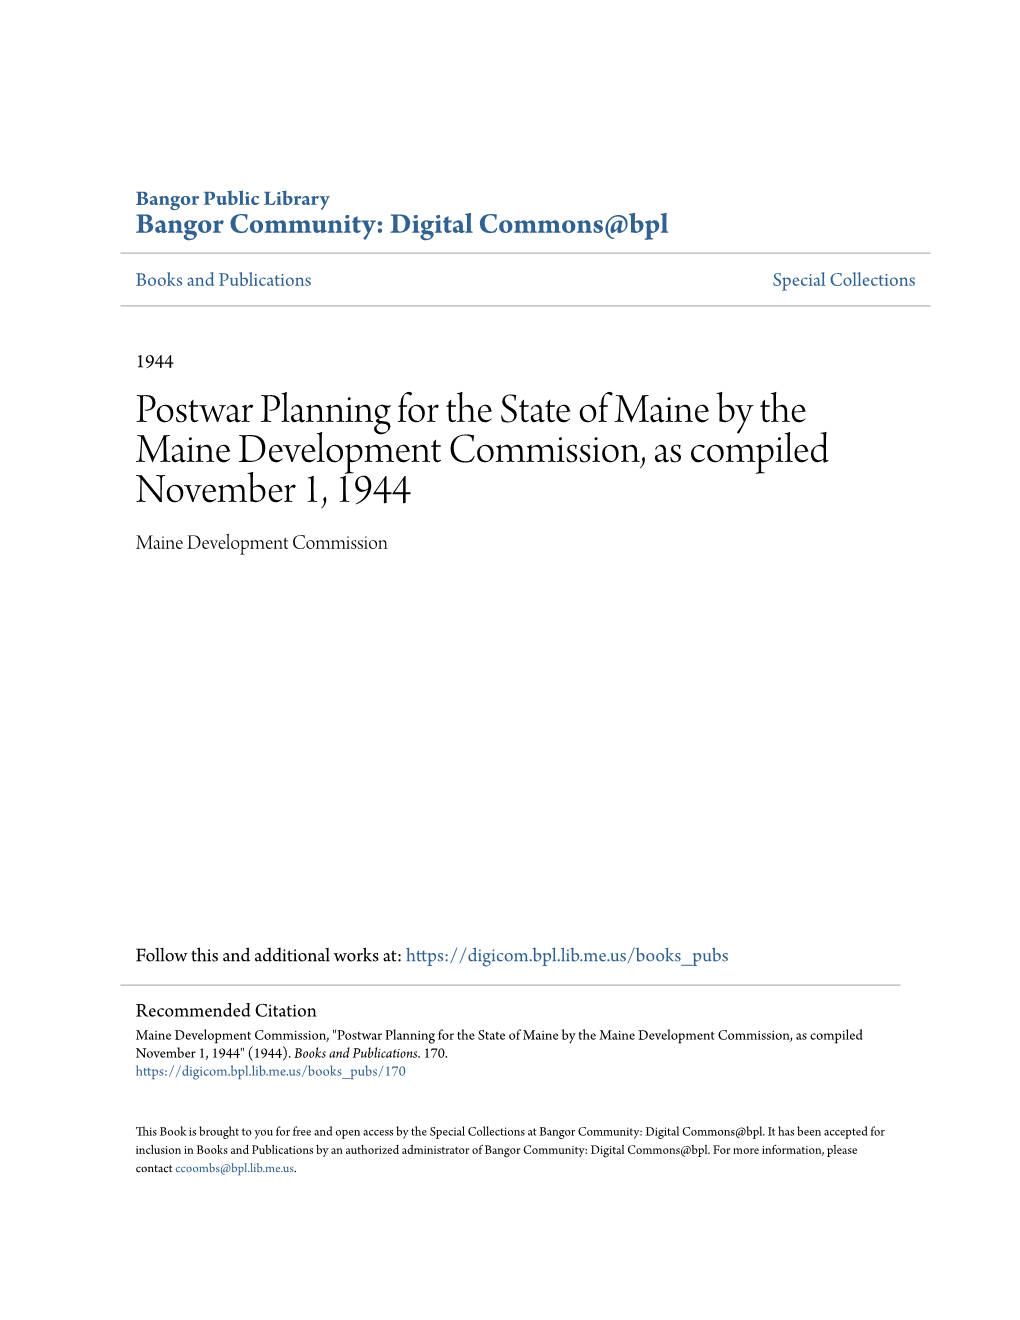 Postwar Planning for the State of Maine by the Maine Development Commission, As Compiled November 1, 1944 Maine Development Commission